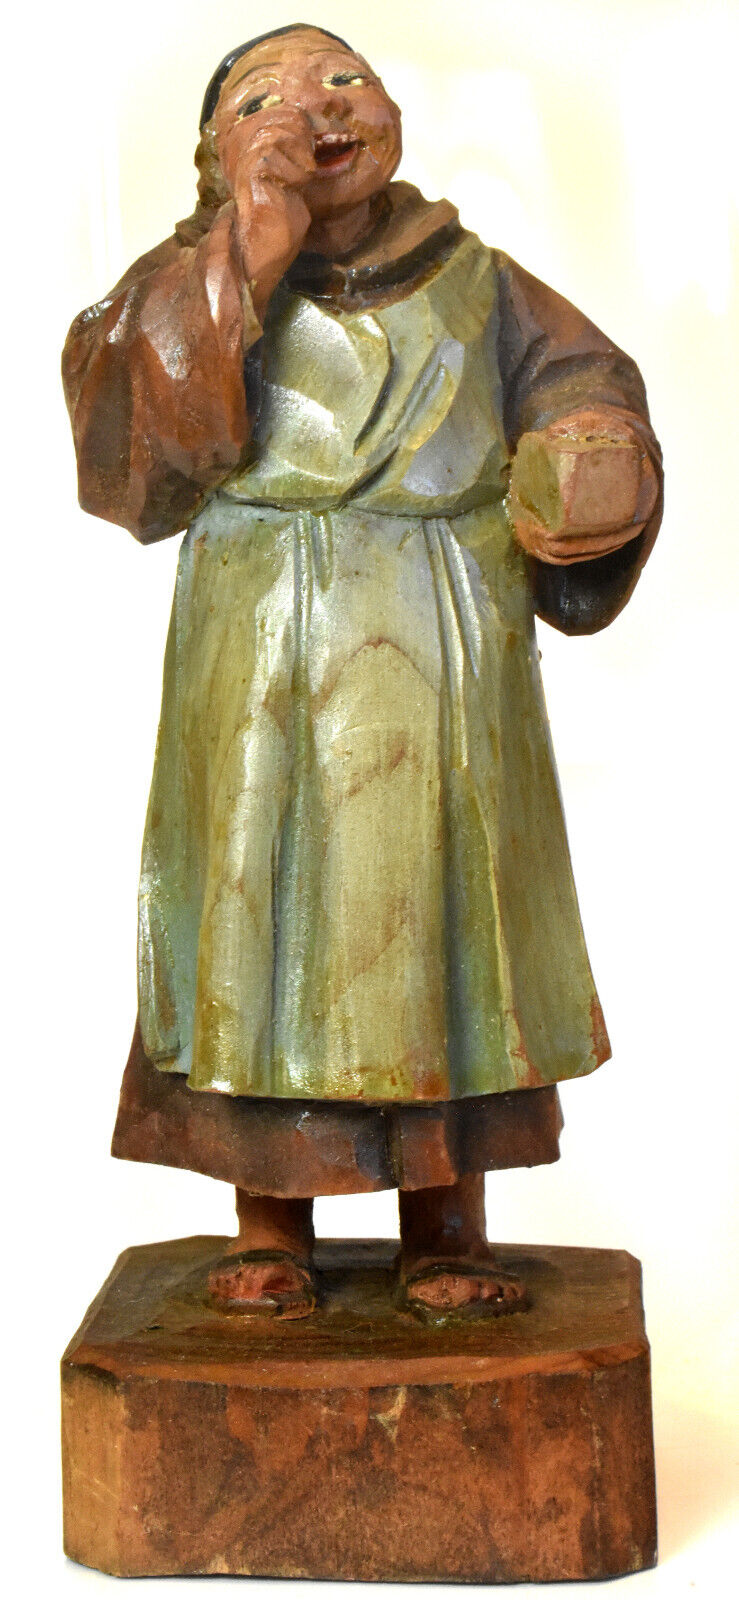 Snuff Using Monk - Small 19th C. Antique German Figure - Hand Carved, Painted